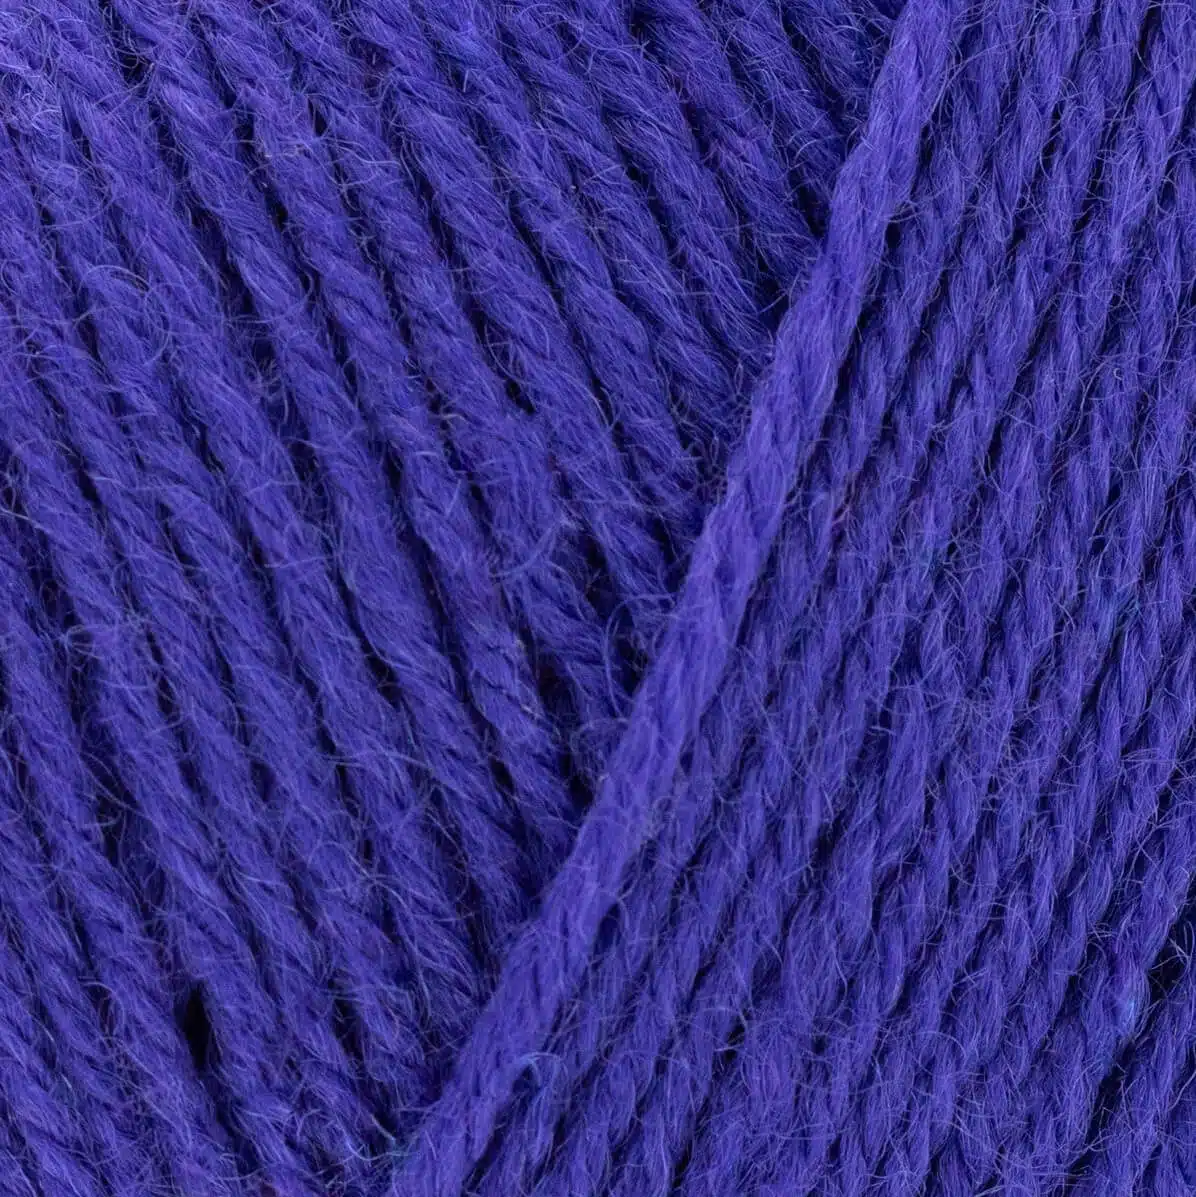 West Yorkshire Spinners Signature 4ply - Cobalt 1005